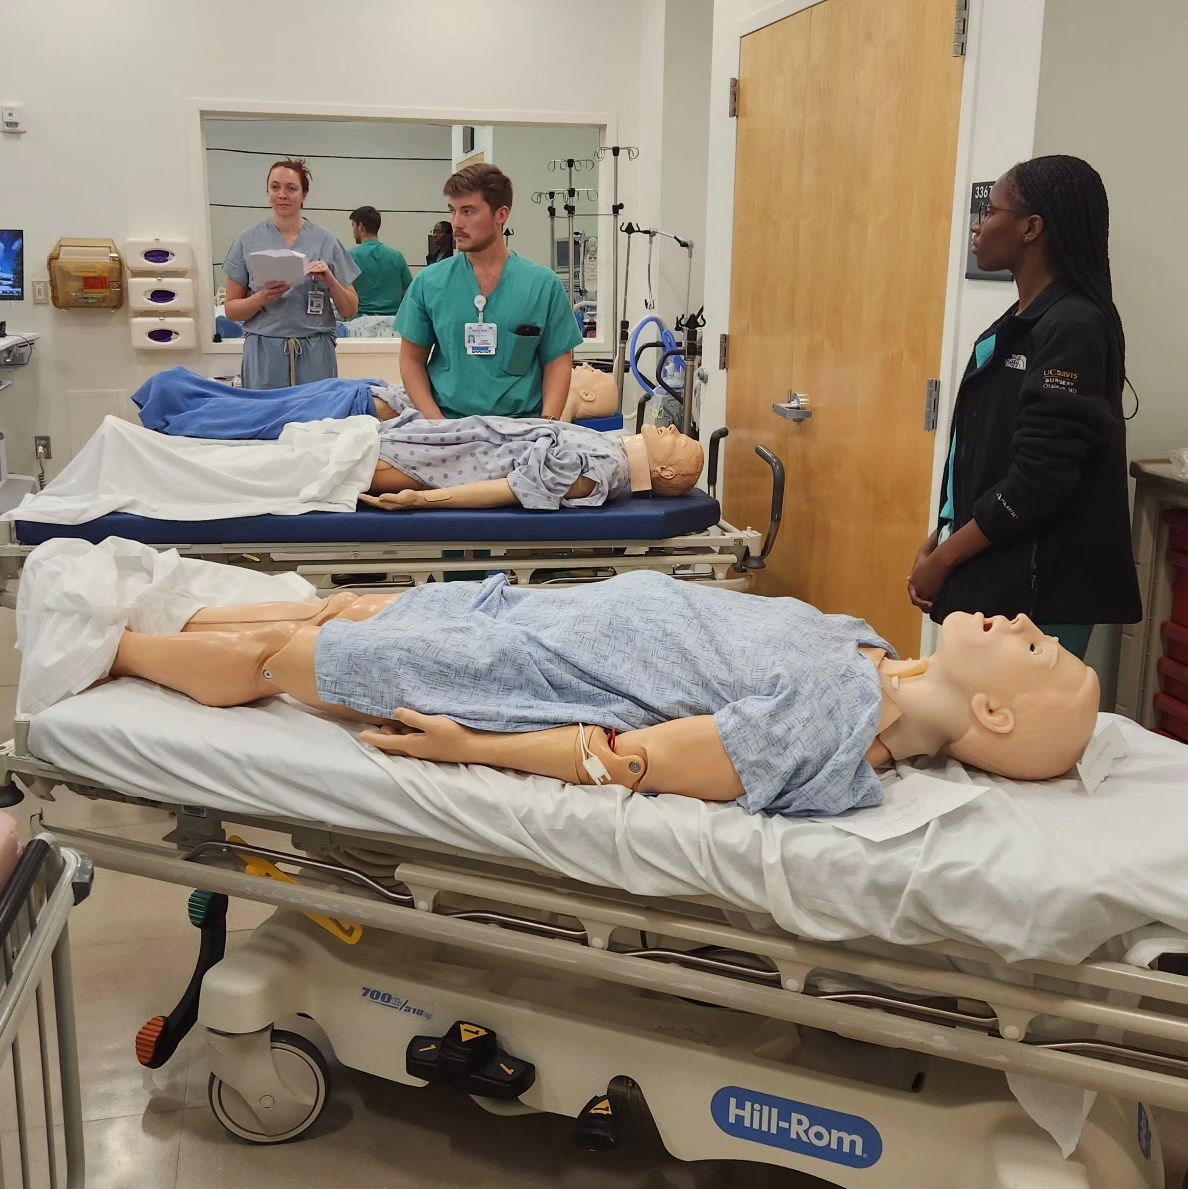 We welcomed residents this week for General Surgery Trauma Day, where they practiced a vast array of skills, including mass casualty events, traumatic injury diagnosis and treatment, and REBOA (resuscitative endovascular balloon occlusion of the aorta). #MedEd #medsim #simtribe